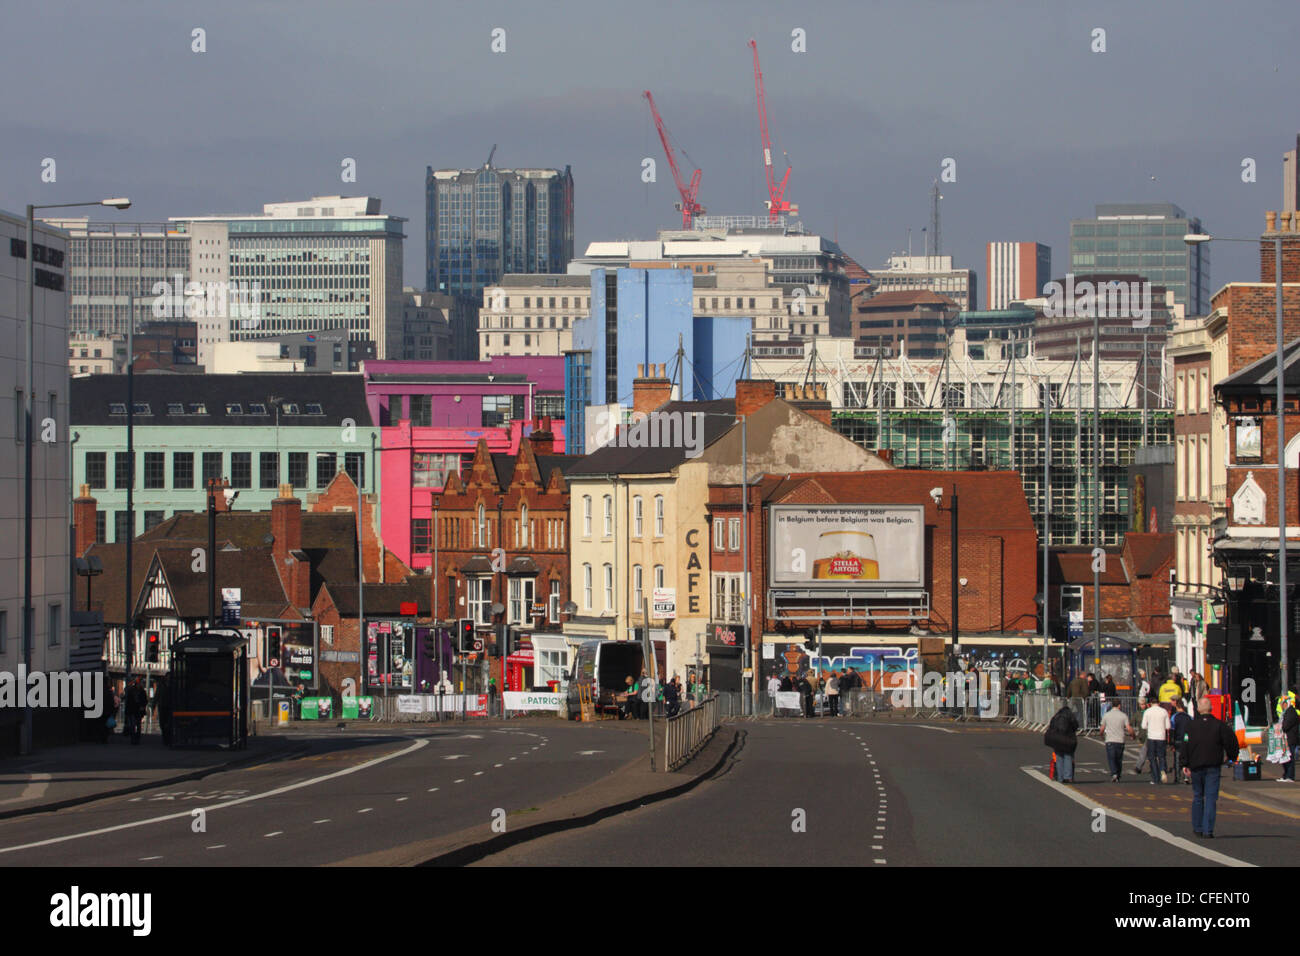 Image shows a mix of architectural styles and periods, Digbeth, Birmingham UK Stock Photo